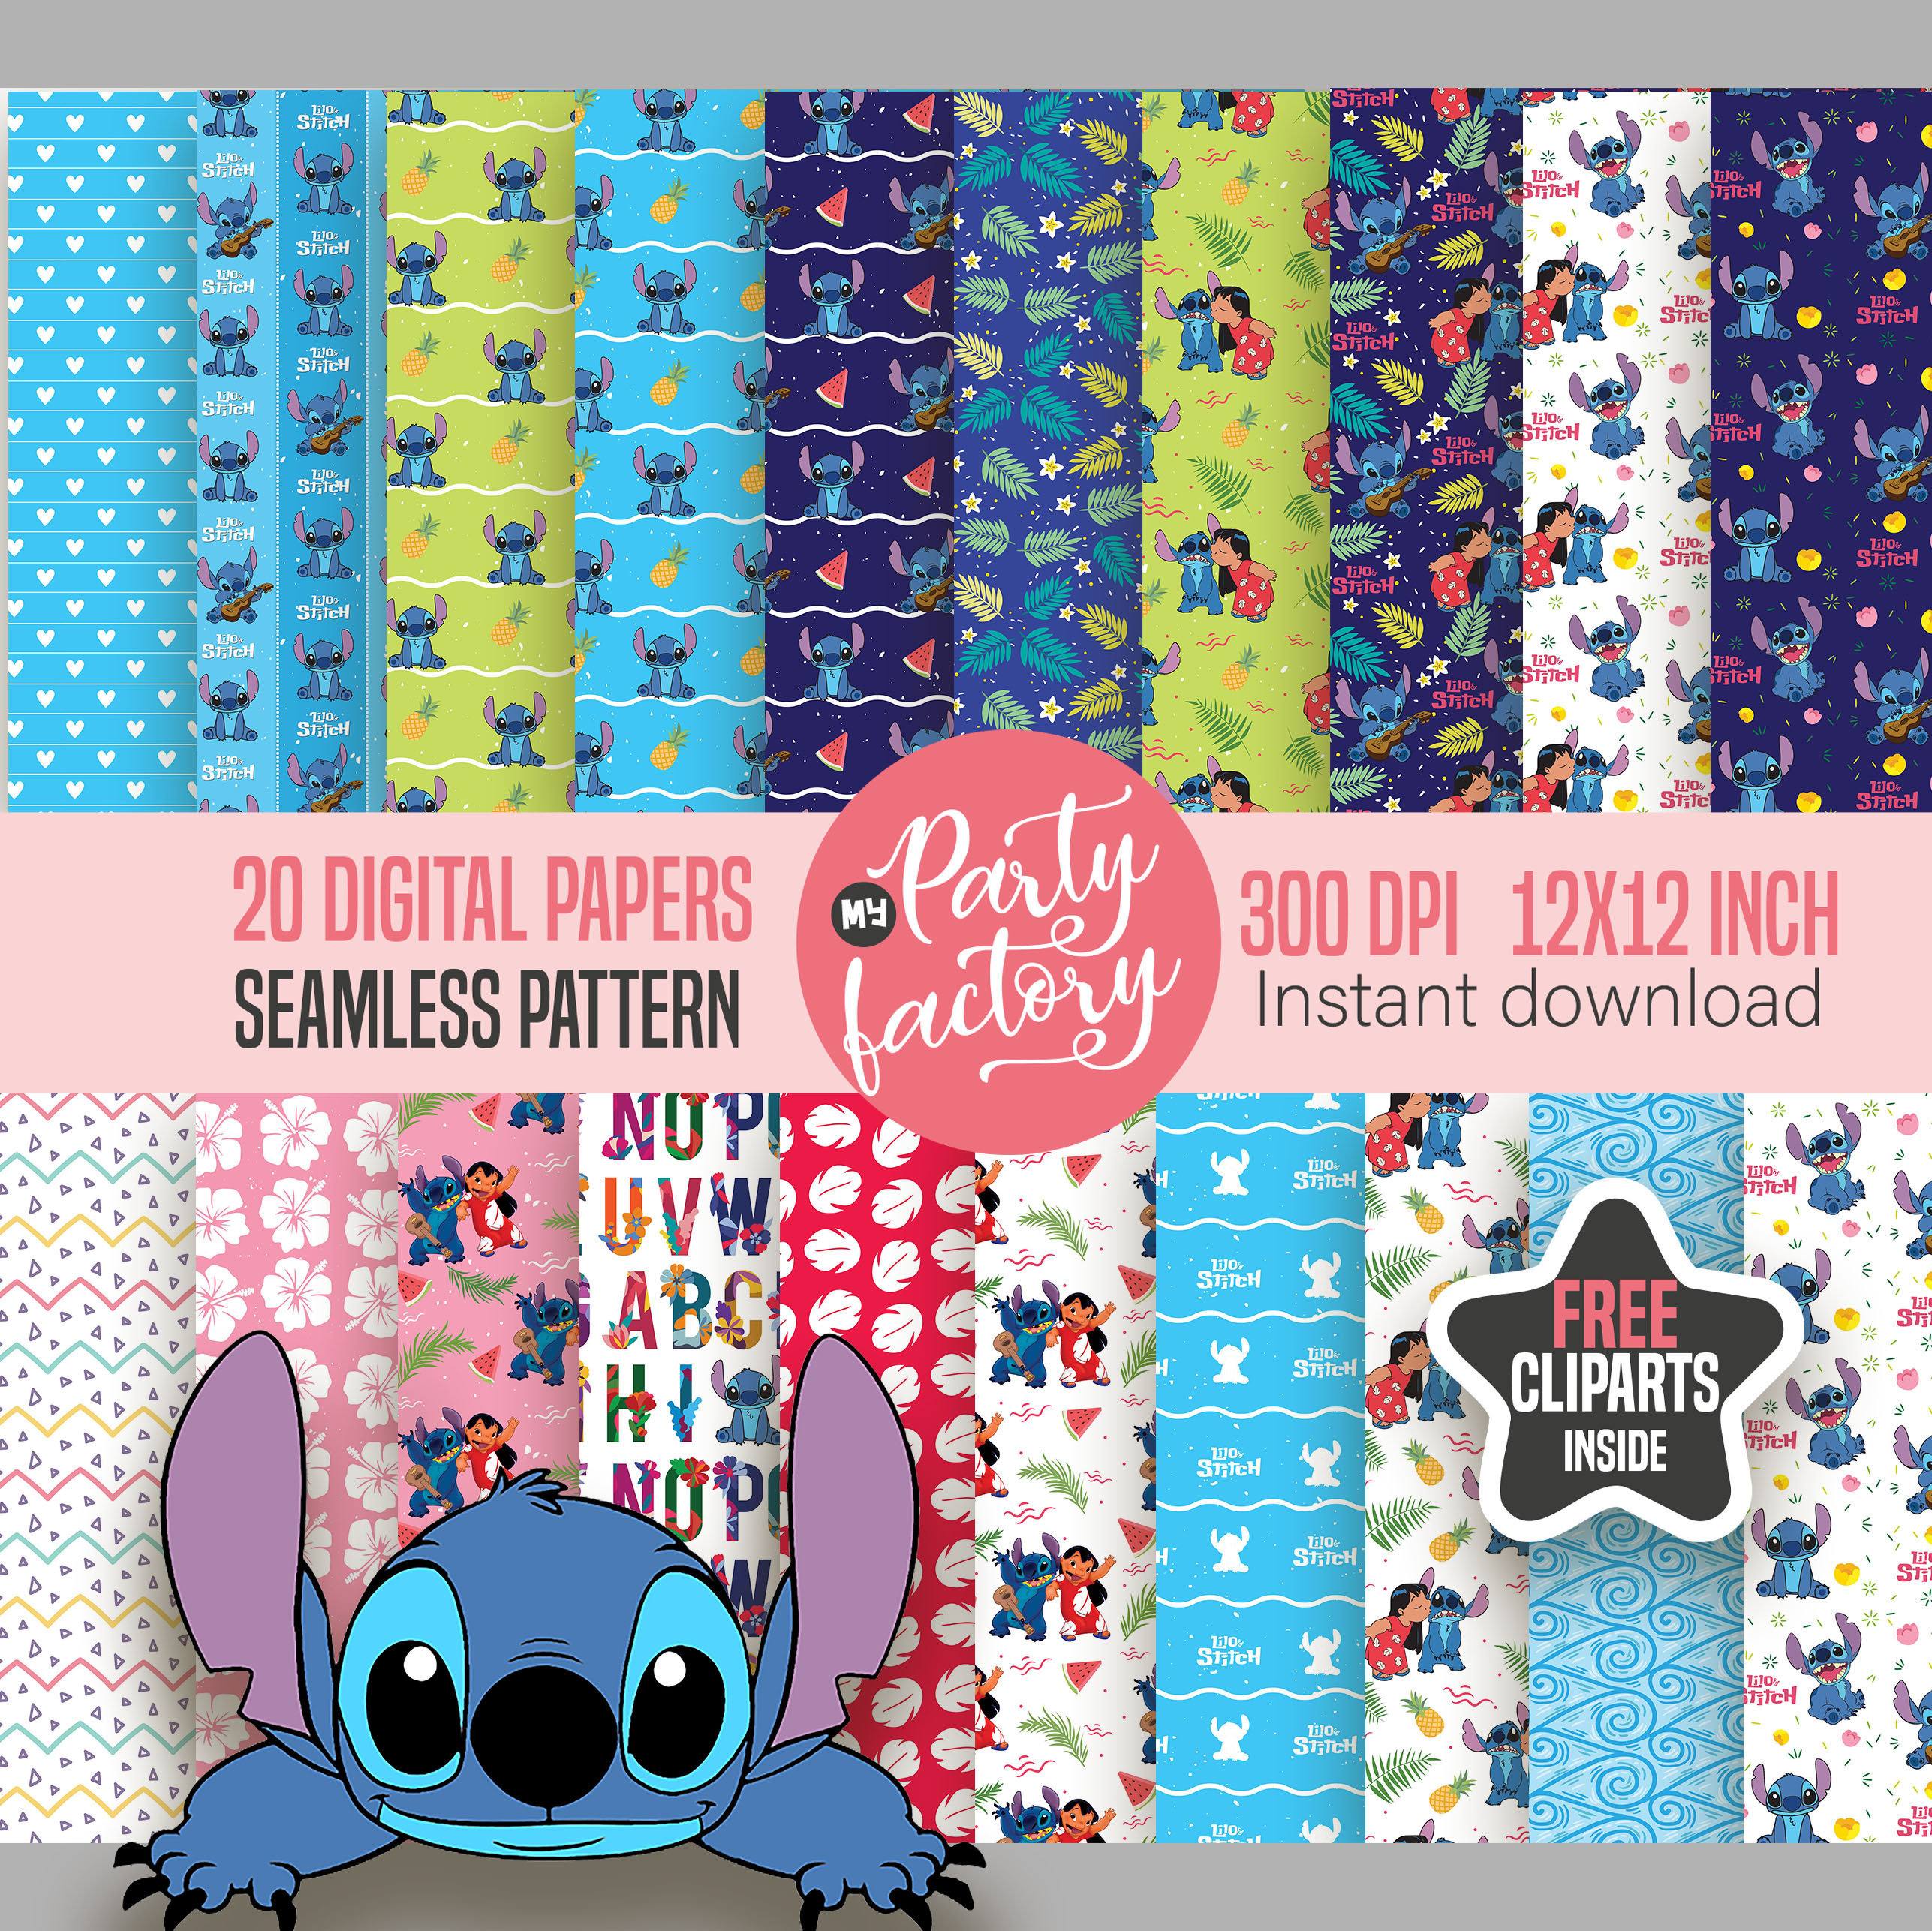 Lilo & Stitch 3x4 Pocket Cards for Digital Scrapbooking, Project